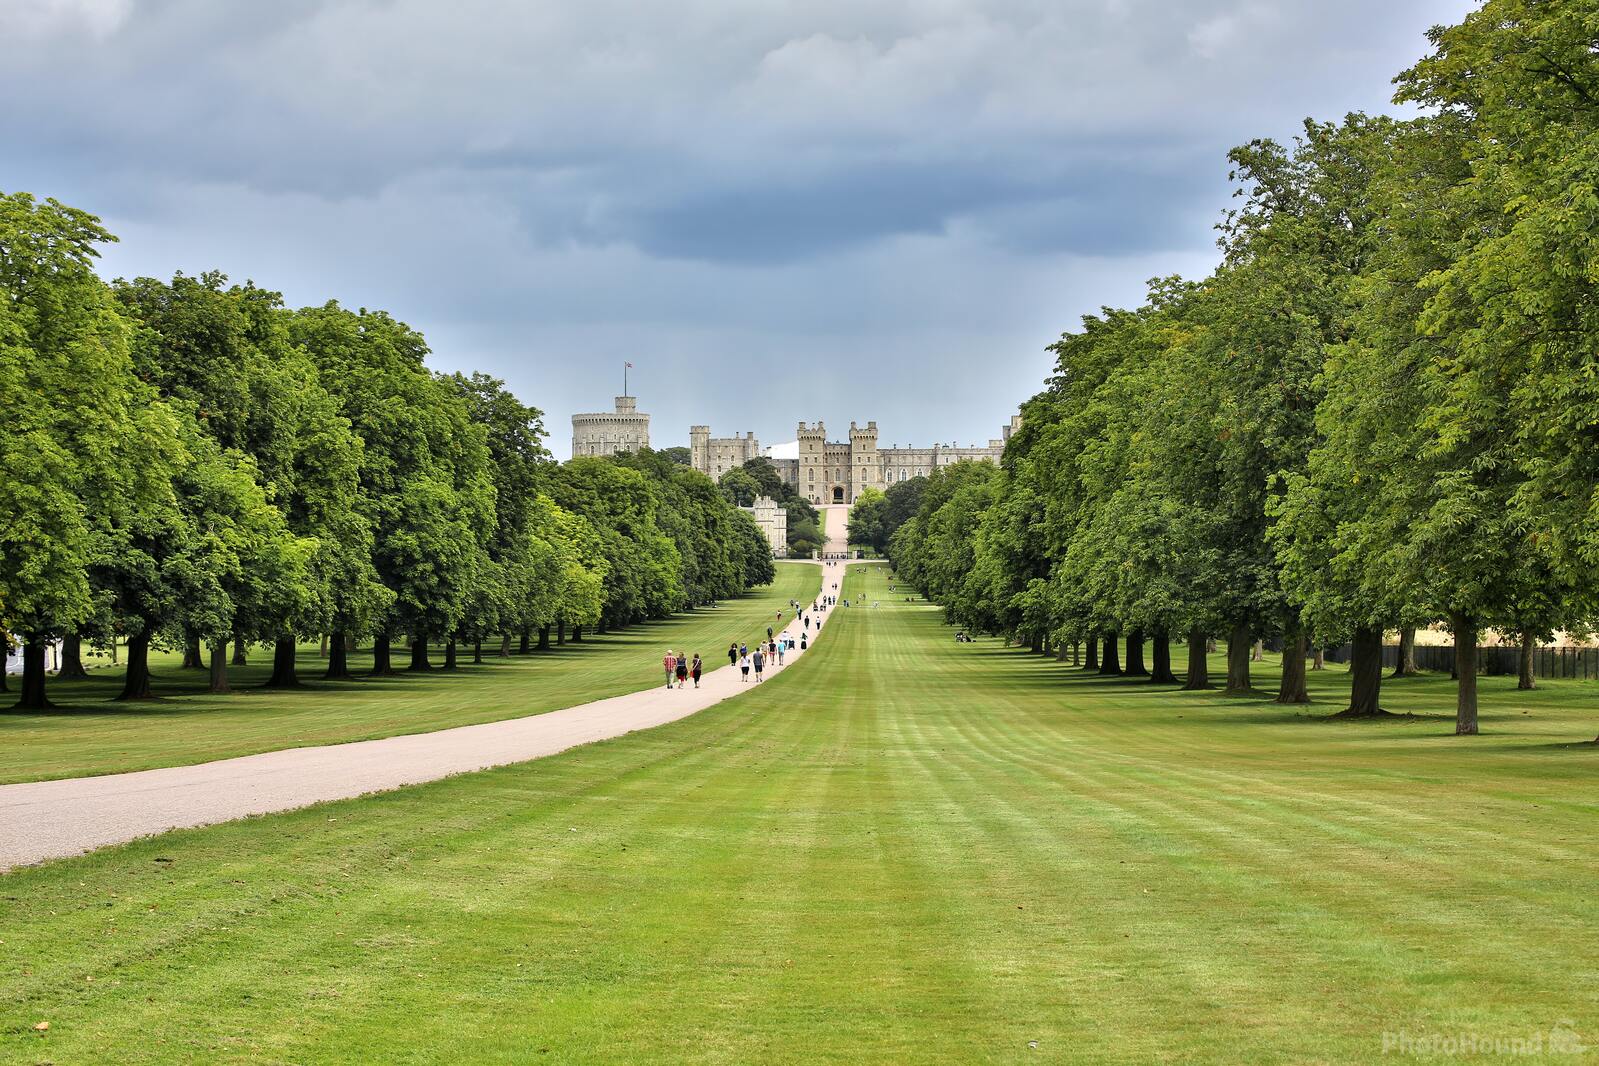 Image of Windsor Castle from The Long Walk by Jules Renahan